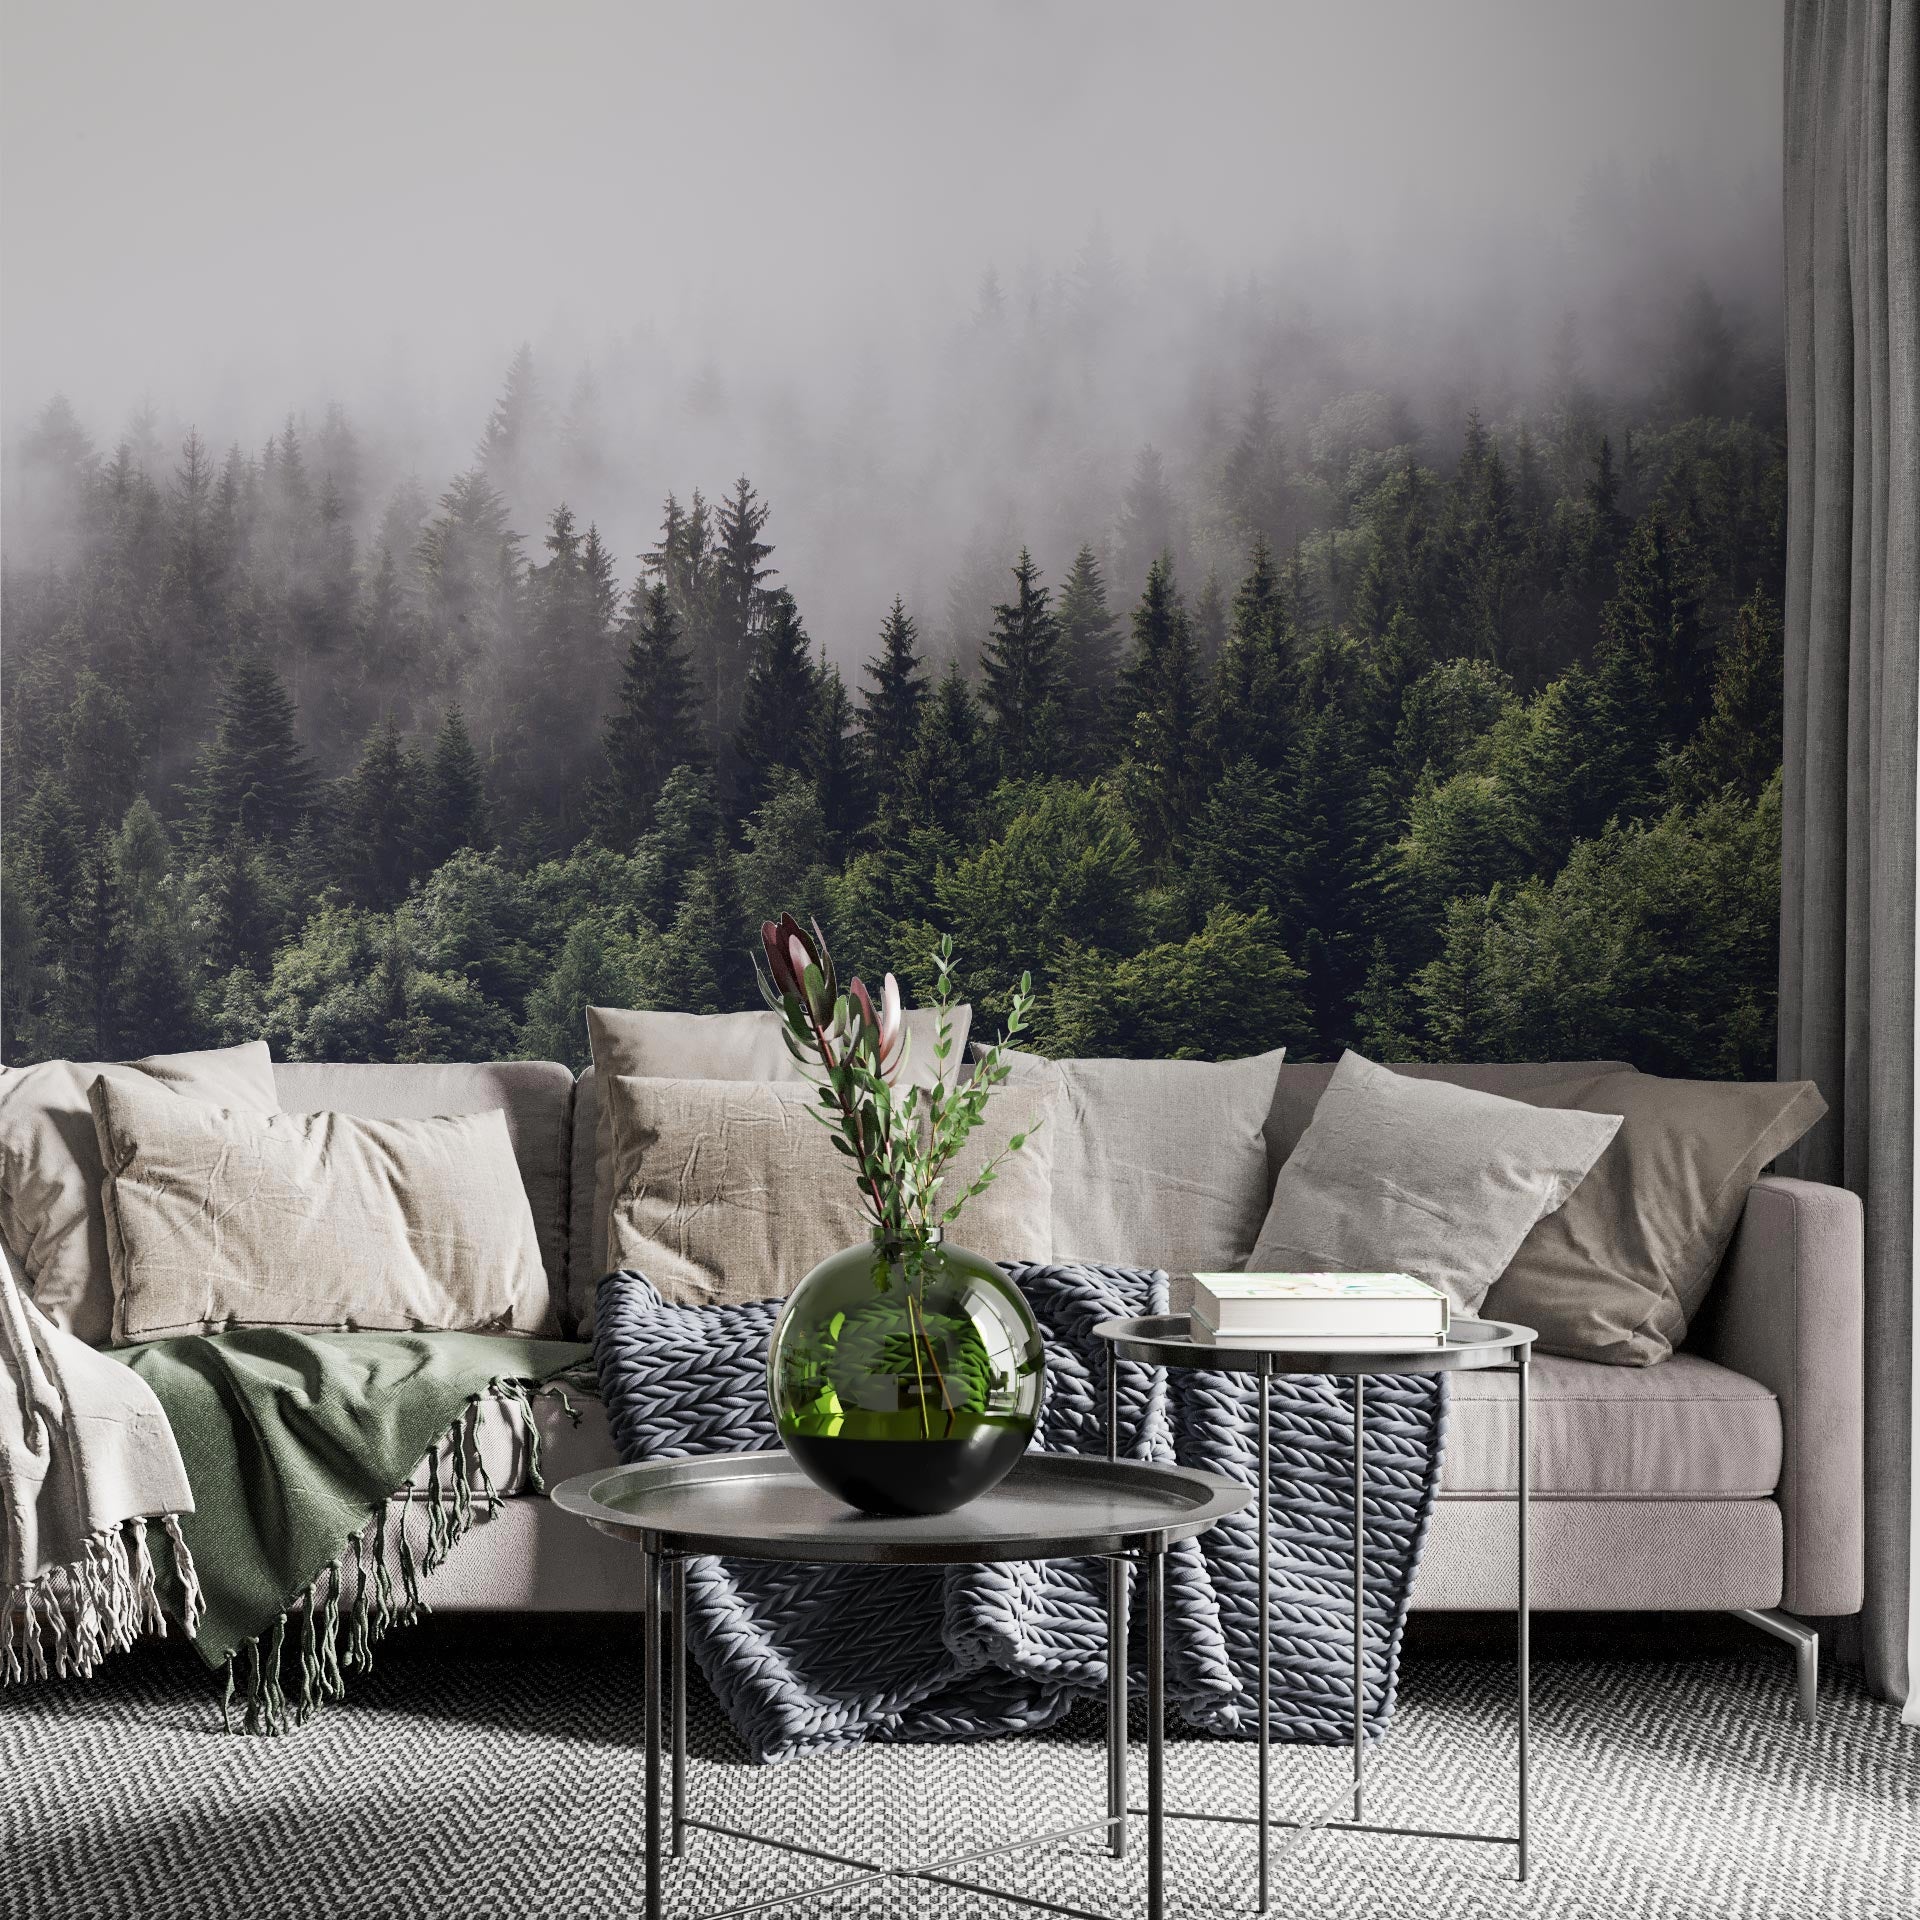 files/A-peel-and-stick-wallpaper-mural-depicting-a-foggy-forest.-The-forest-is-a-backdrop-for-a-sofa_-coffee-table_-and-armchairs.-The-fog-provides-a-sense-of-relaxation-and-peace.jpg